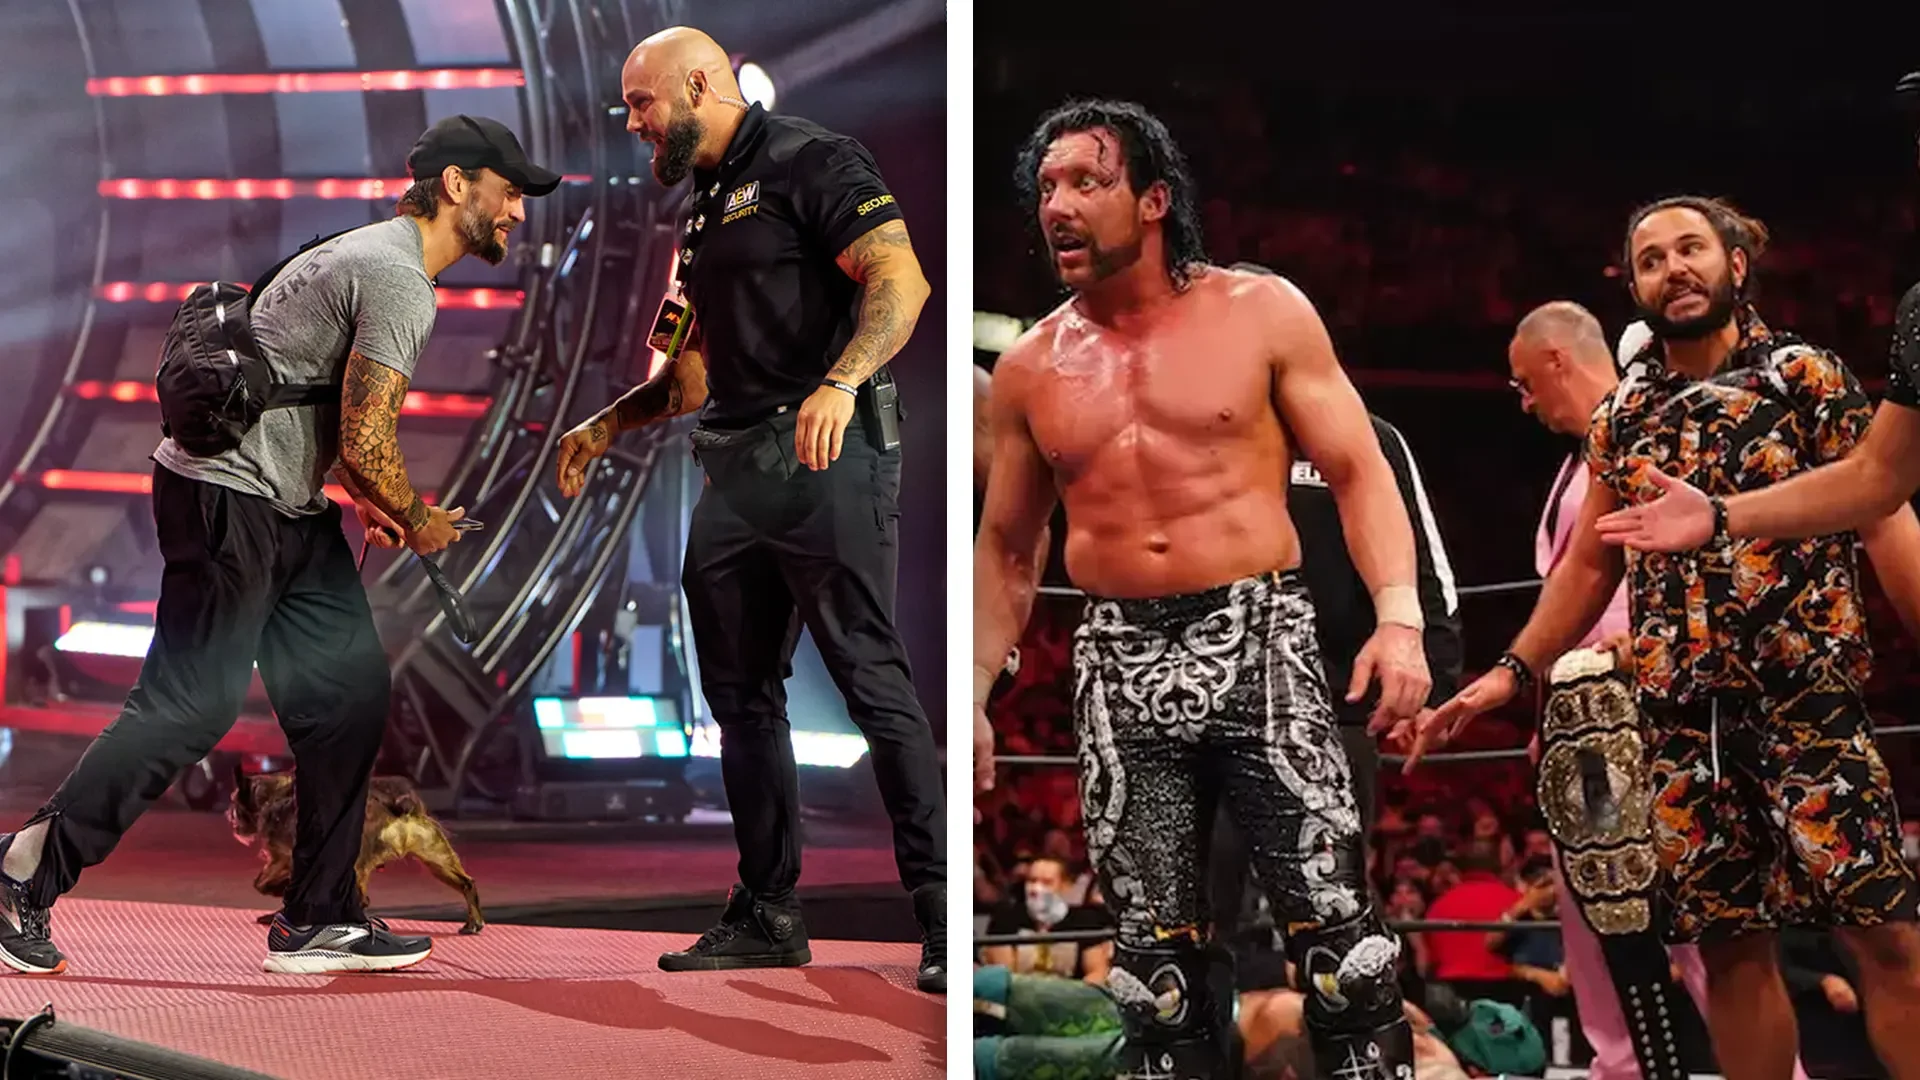 AEW All Out Backstage Fight Details, CM Punk's Dog 'Larry' Involved, The Elite's Side Of The Story